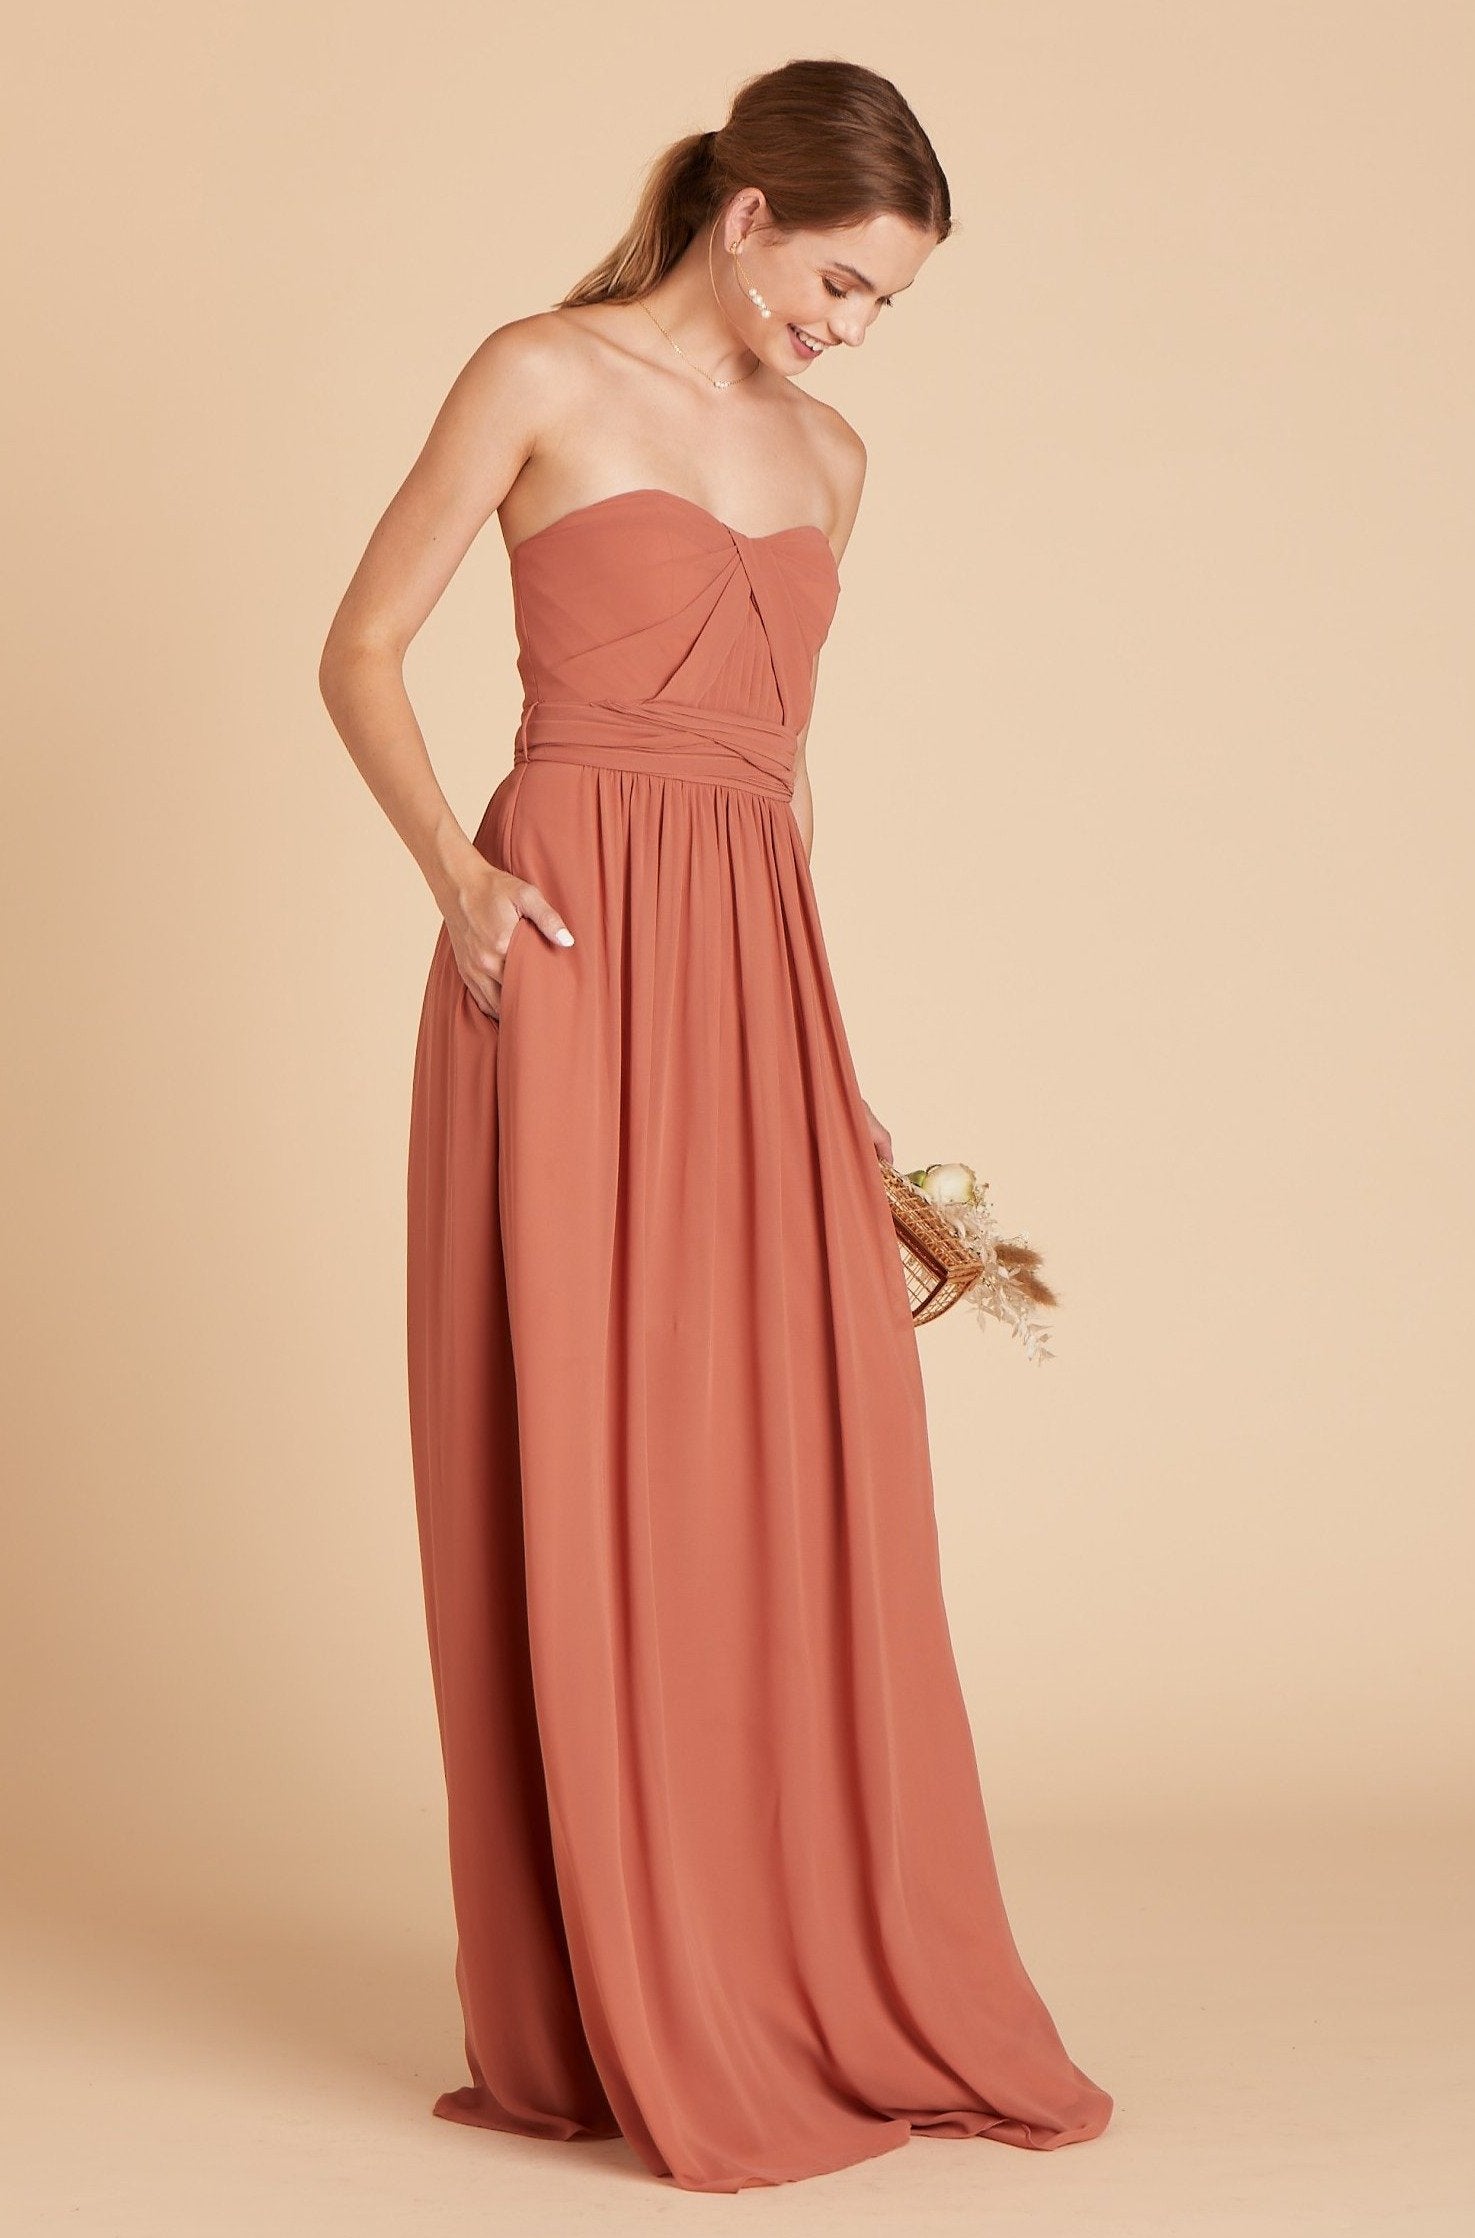  Grace convertible bridesmaid dress in terracotta orange chiffon by Birdy Grey, side view with hand in pocket